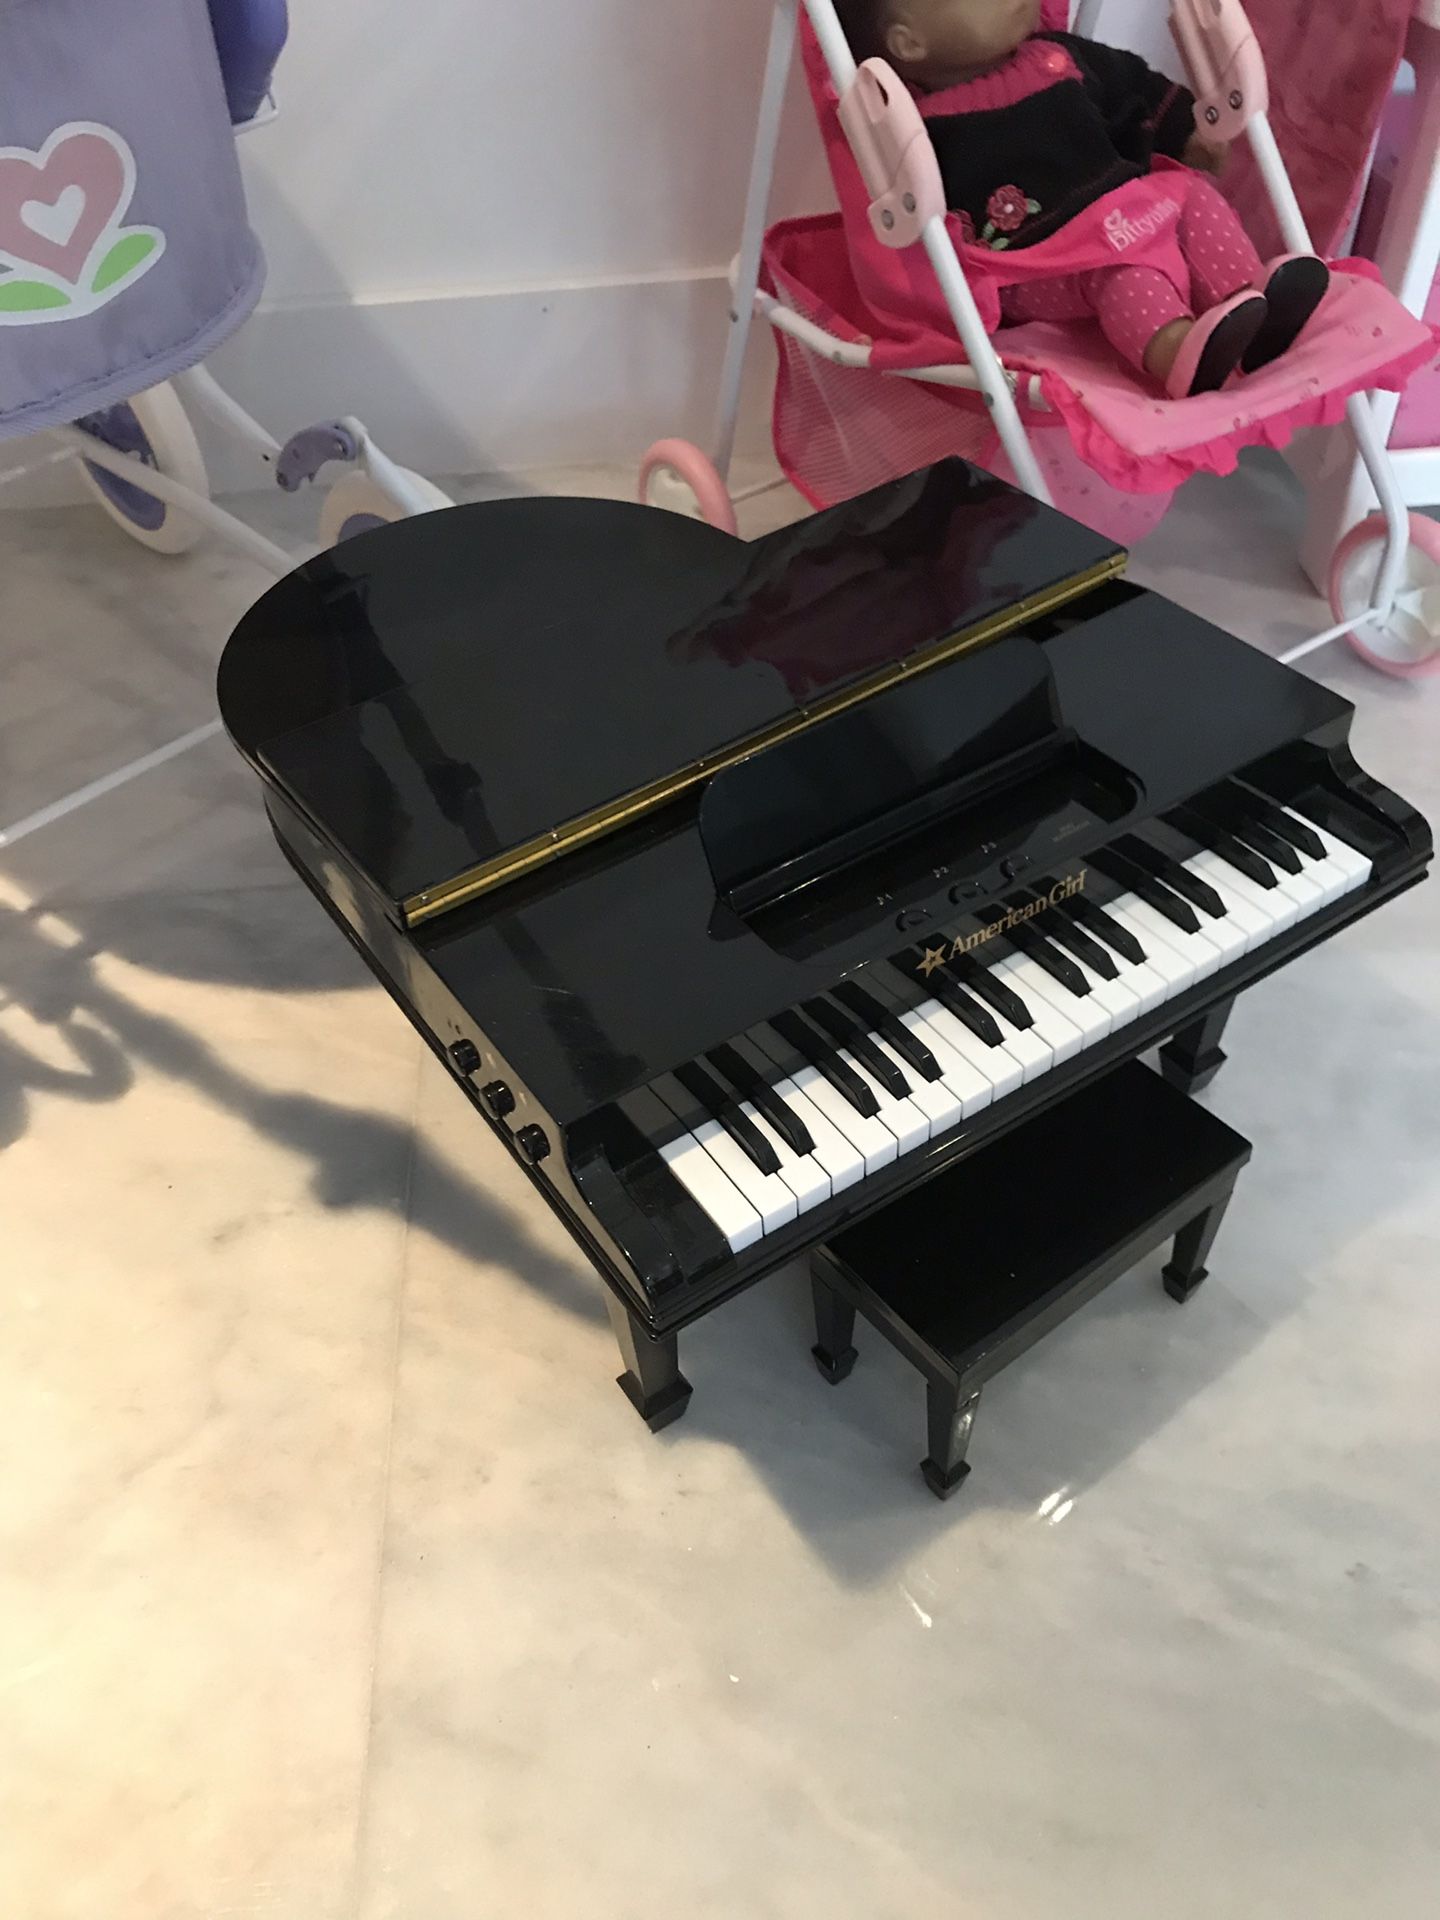 Baby Grand piano for American girl doll $50